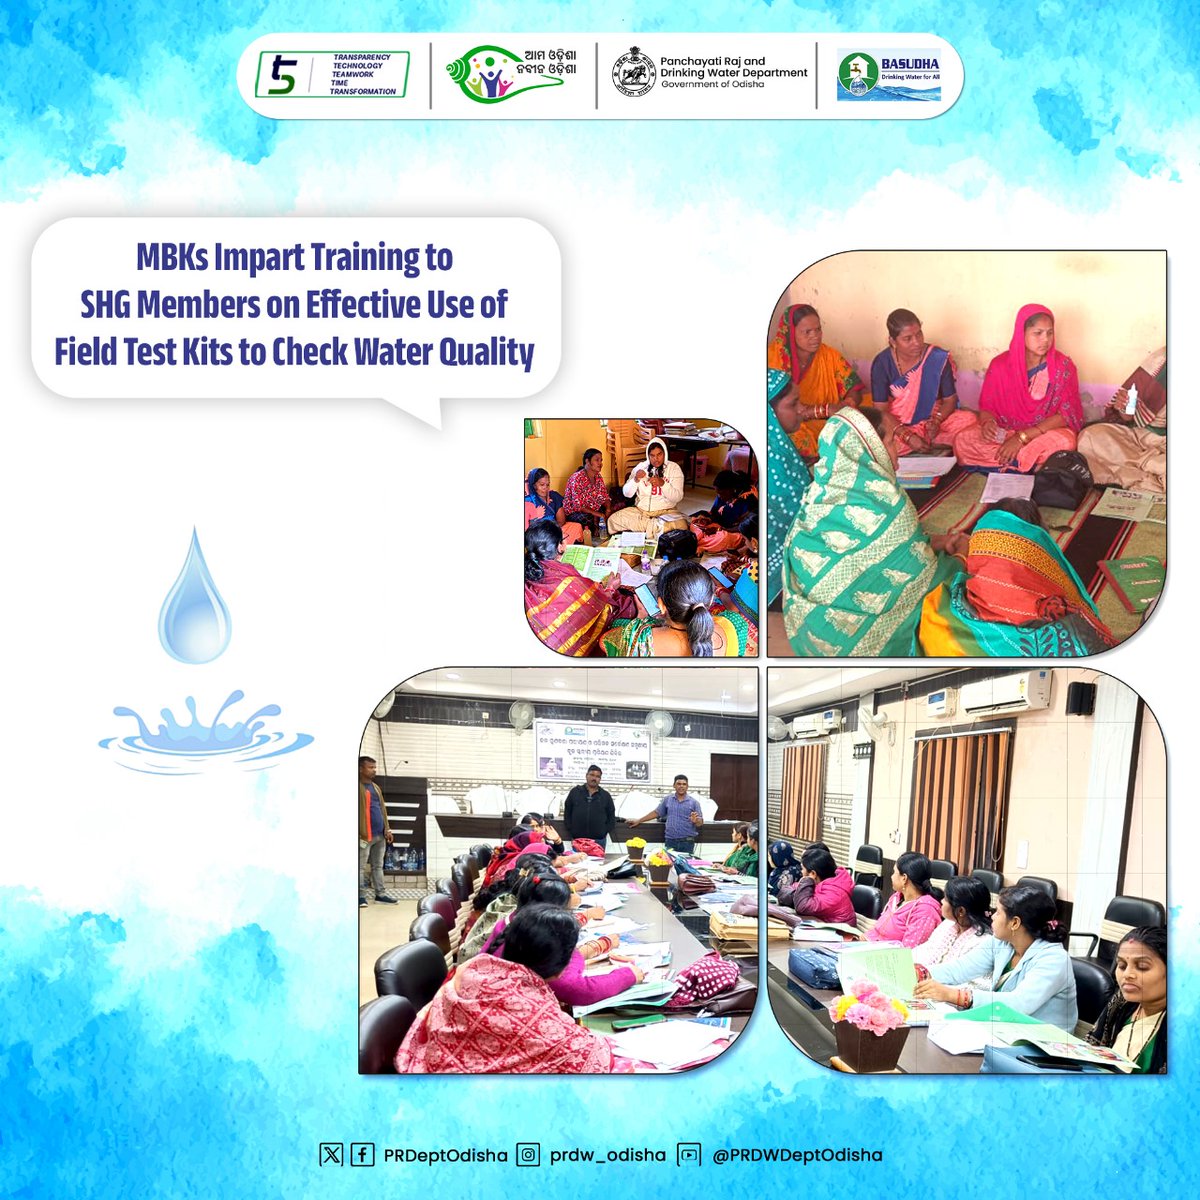 #MasterBookKeepers & #SHG members in various Gram Panchayats across #Odisha imparted training on the effective use of #FieldTestKits for water quality assessment. This initiative will safeguard & promote the well-being of communities while enhancing public awareness. #OdishaCares